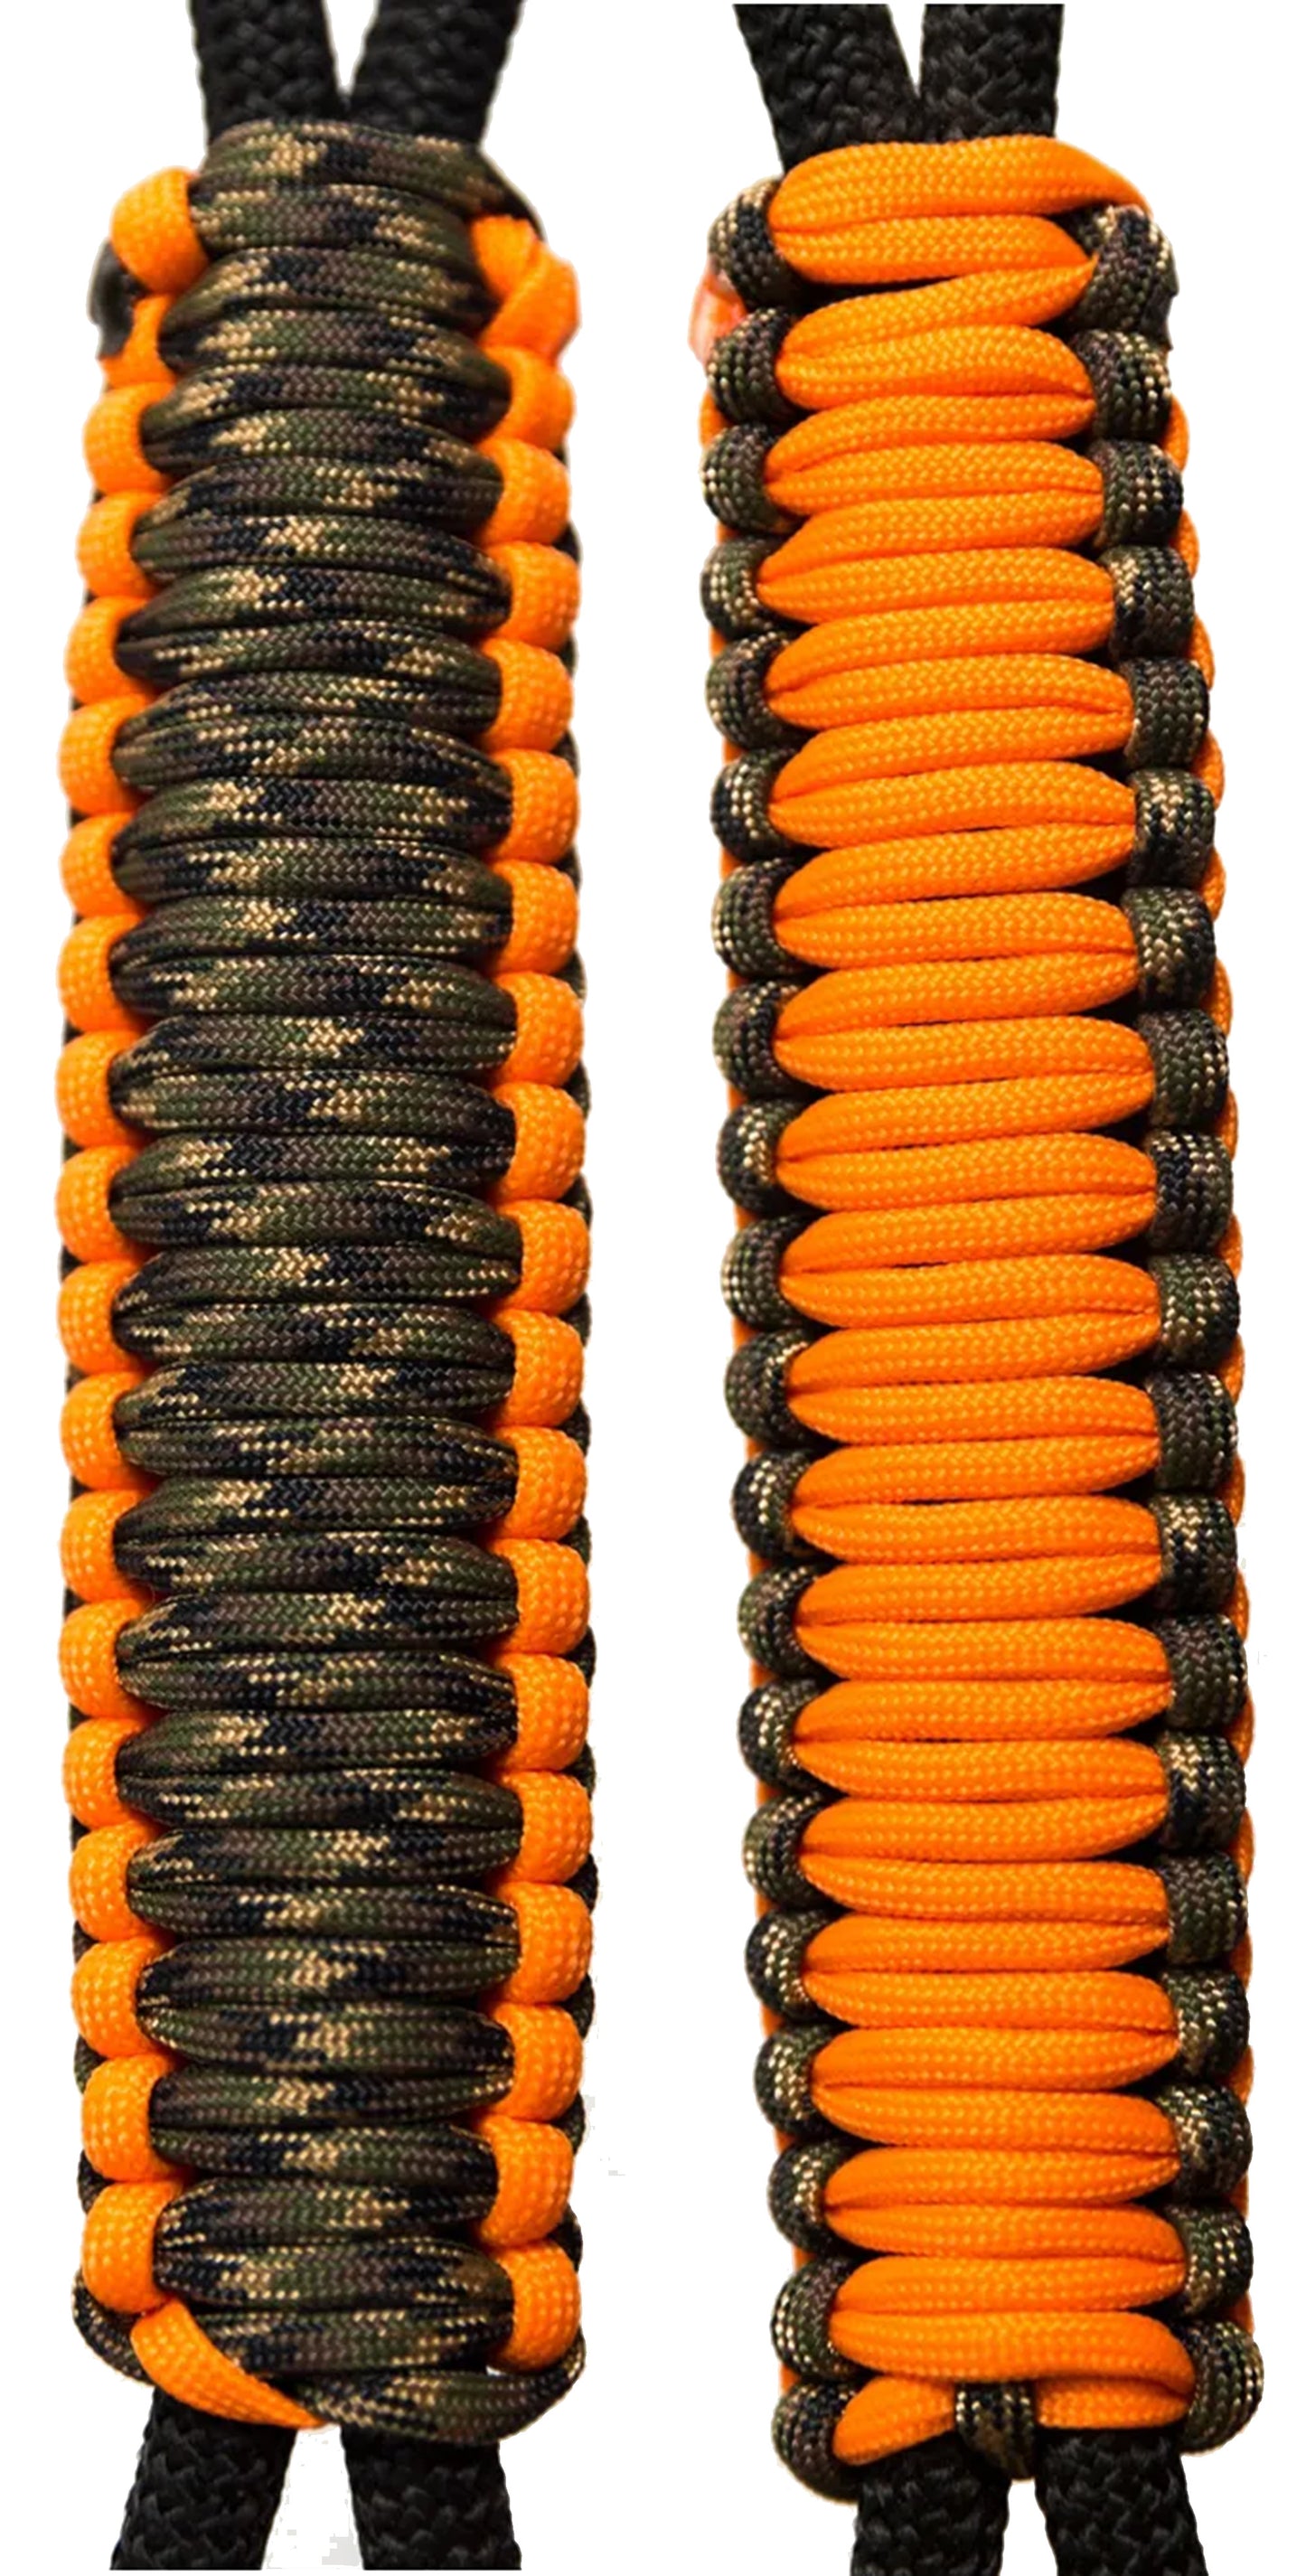 Camo & Blaze Orange C002C036 - Paracord Handmade Handles for Stainless Steel Tumblers - Made in USA!